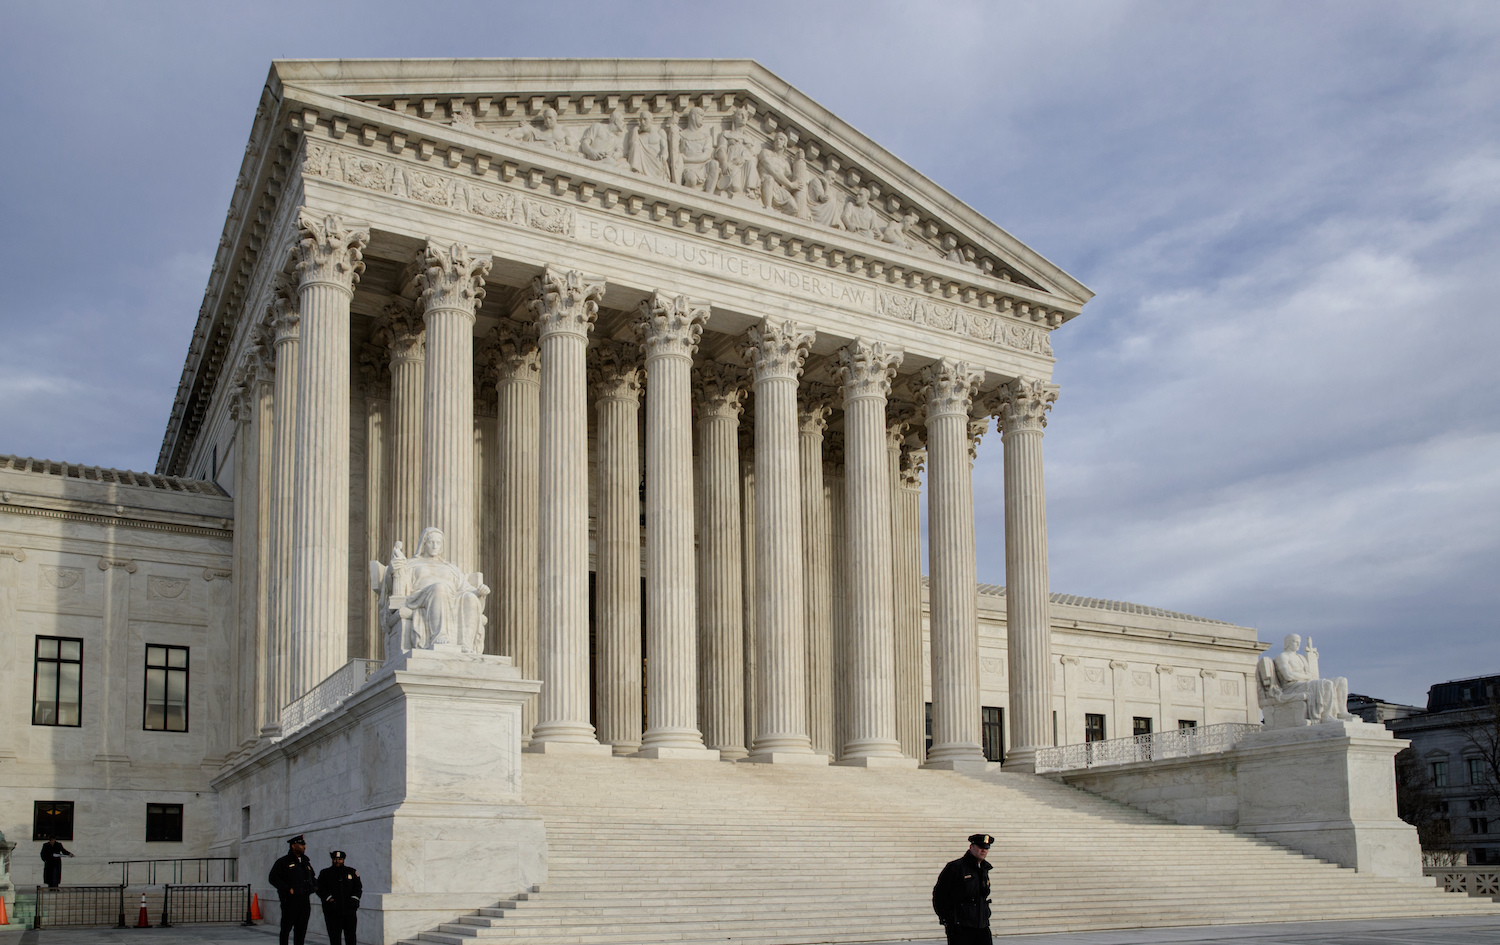 Supreme Court to hear oral argument on limits of sentencing